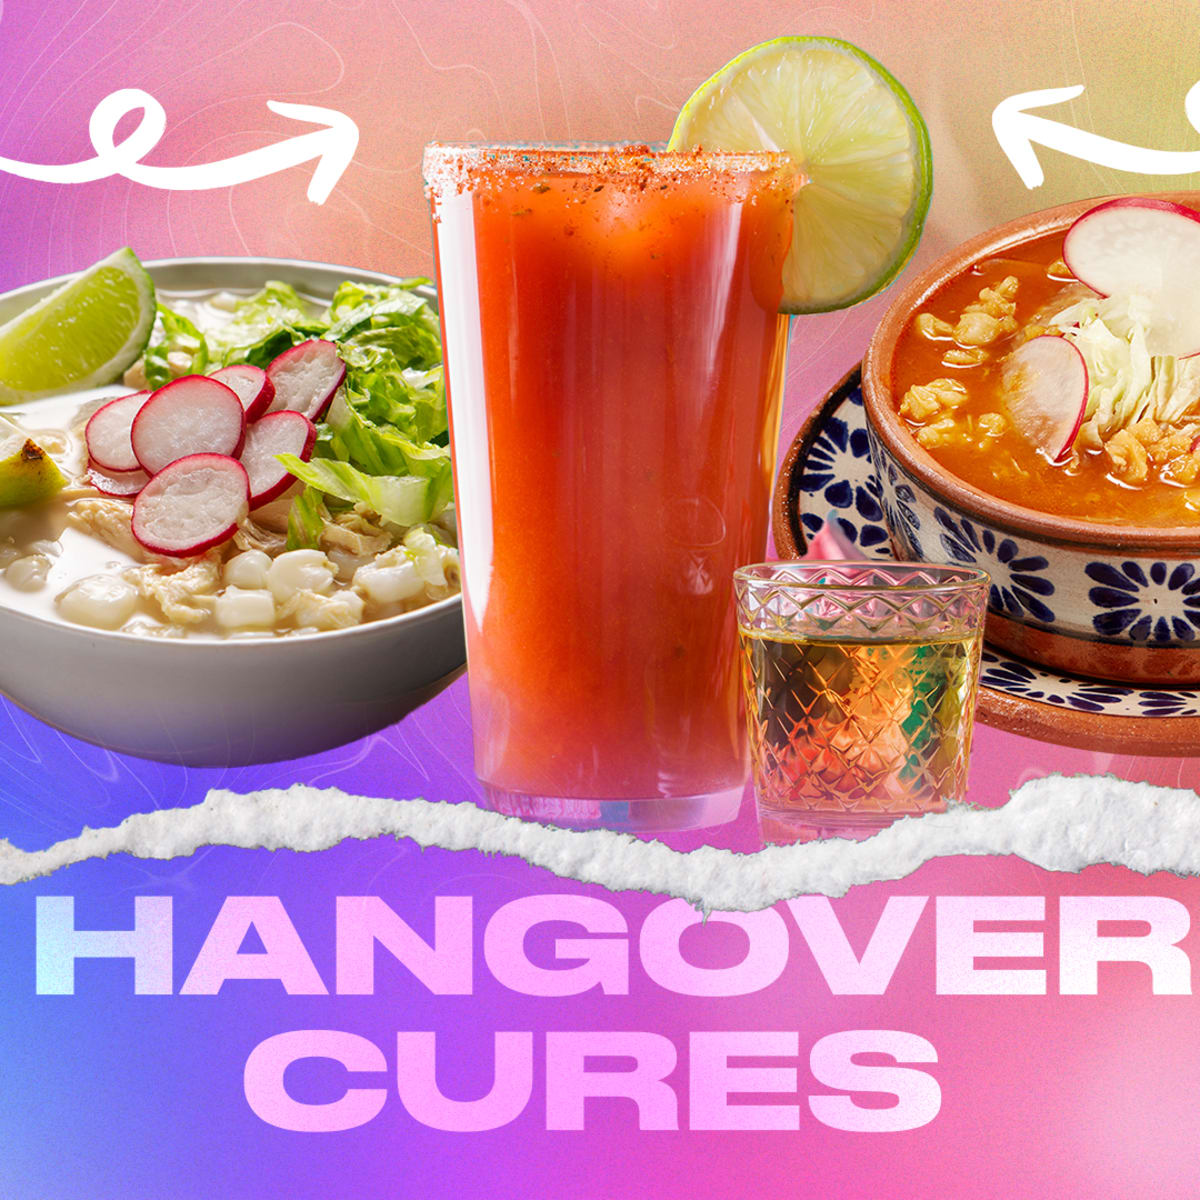 TASCHEN - 🙃 What's your go-to hangover cure? More handy knowledge